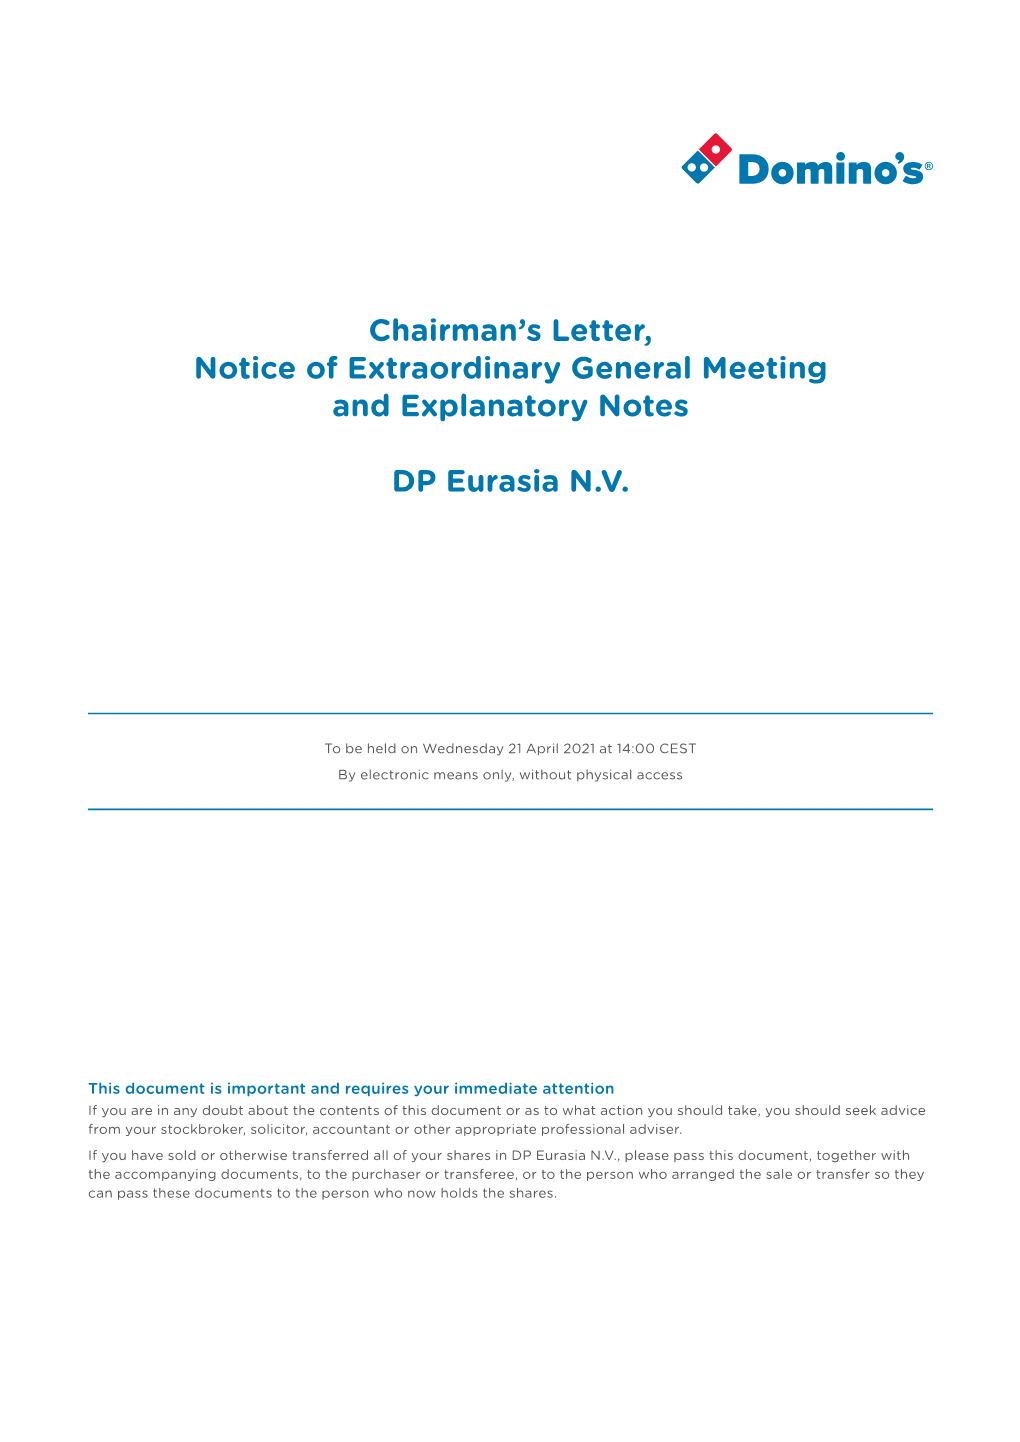 Chairman's Letter, Notice of Extraordinary General Meeting And